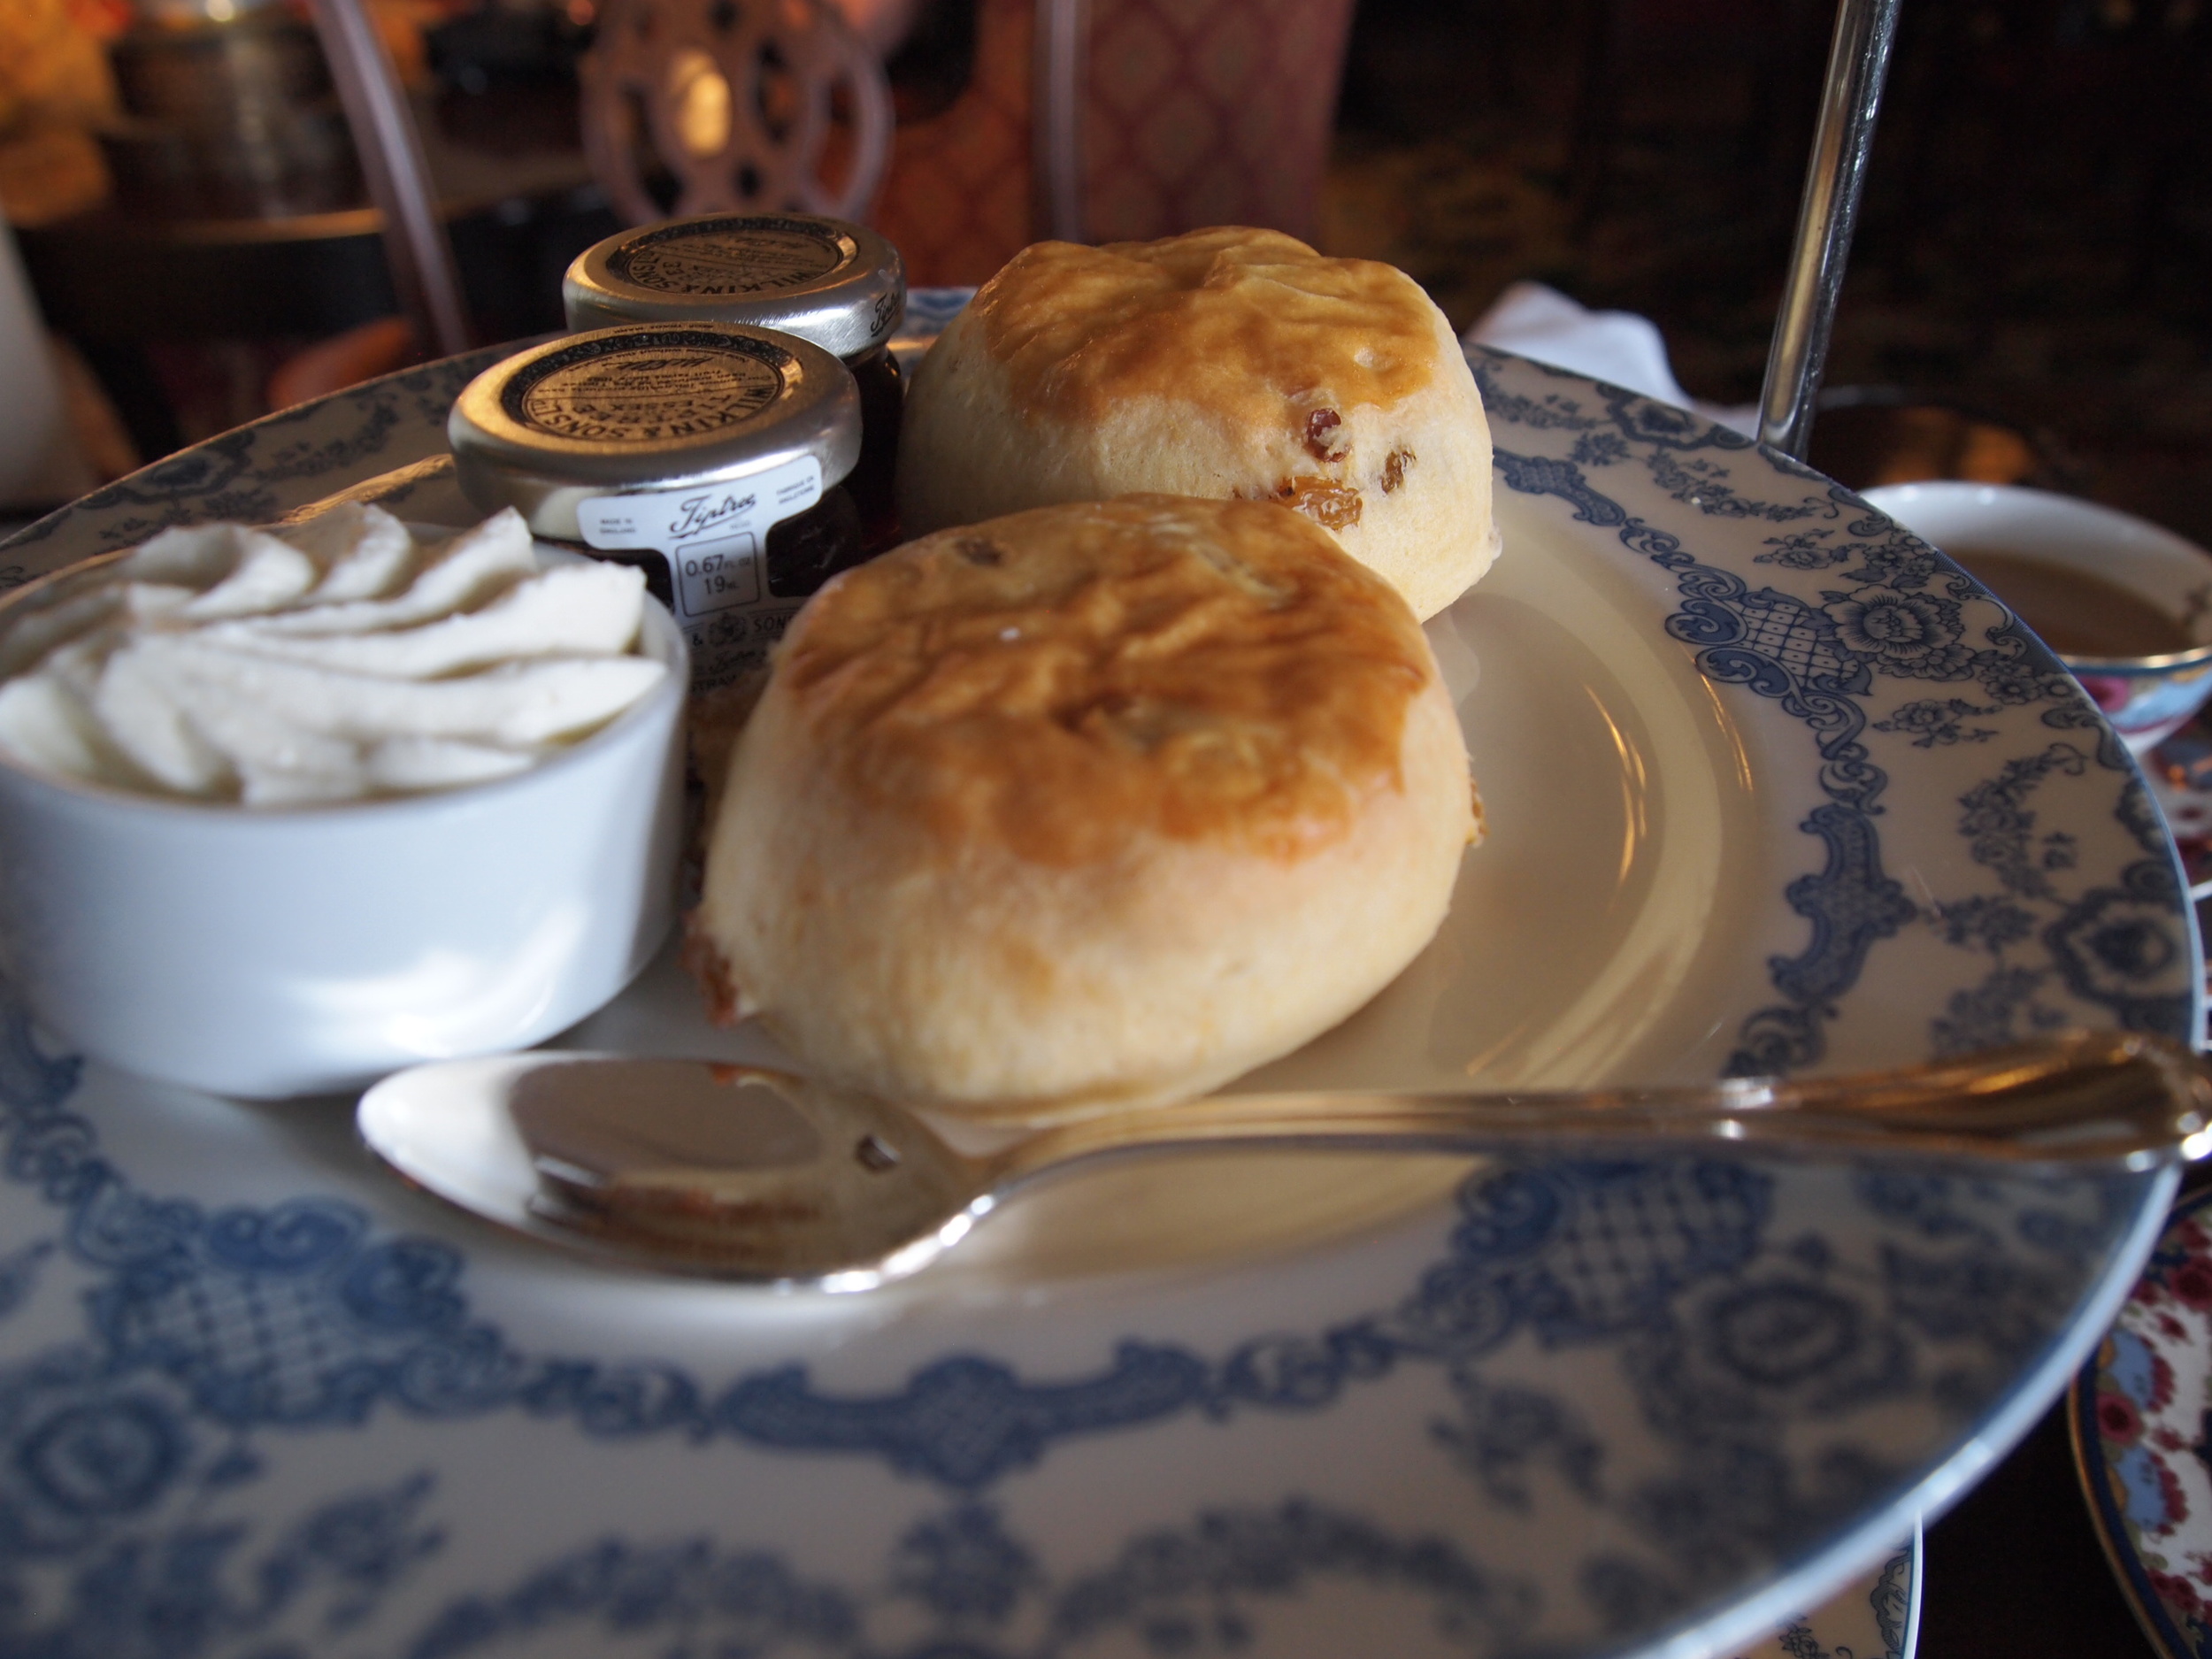  Afternoon Tea: The rainsin scones with clotted cream and jam 